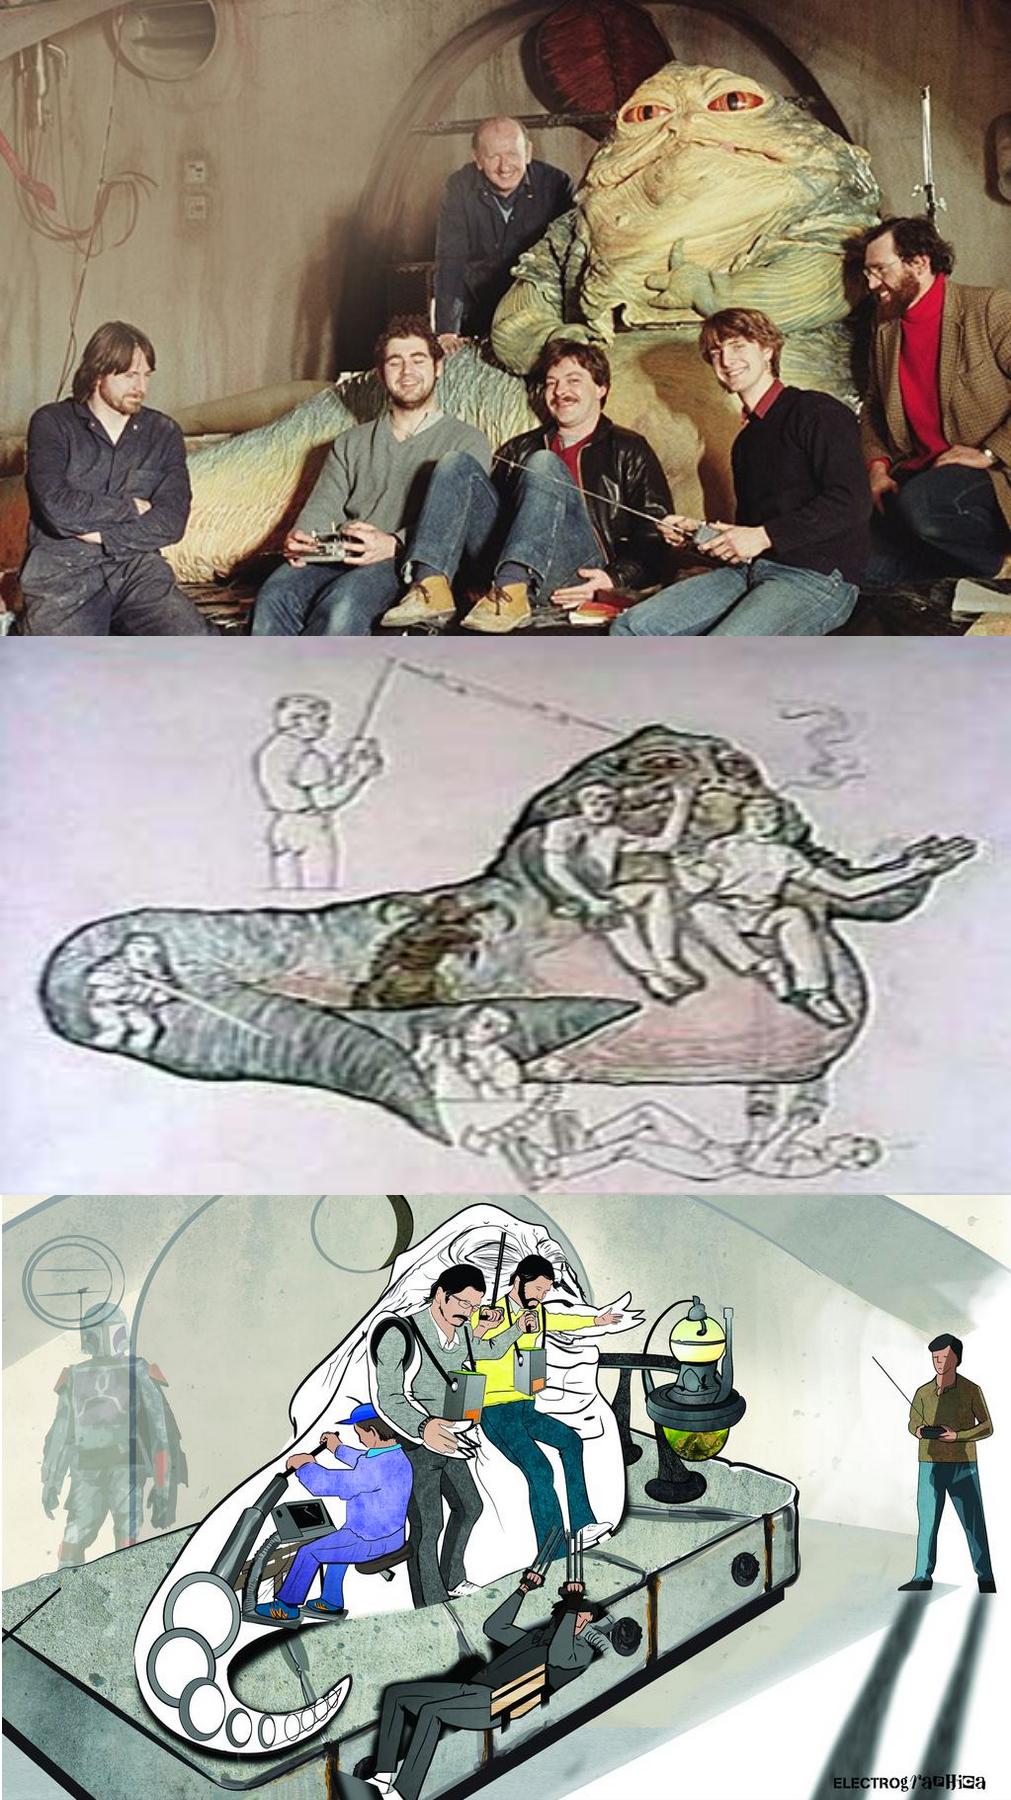 The puppeteers who brought Jabba the Hutt to life in ROTJ and two diagrams of how they did it